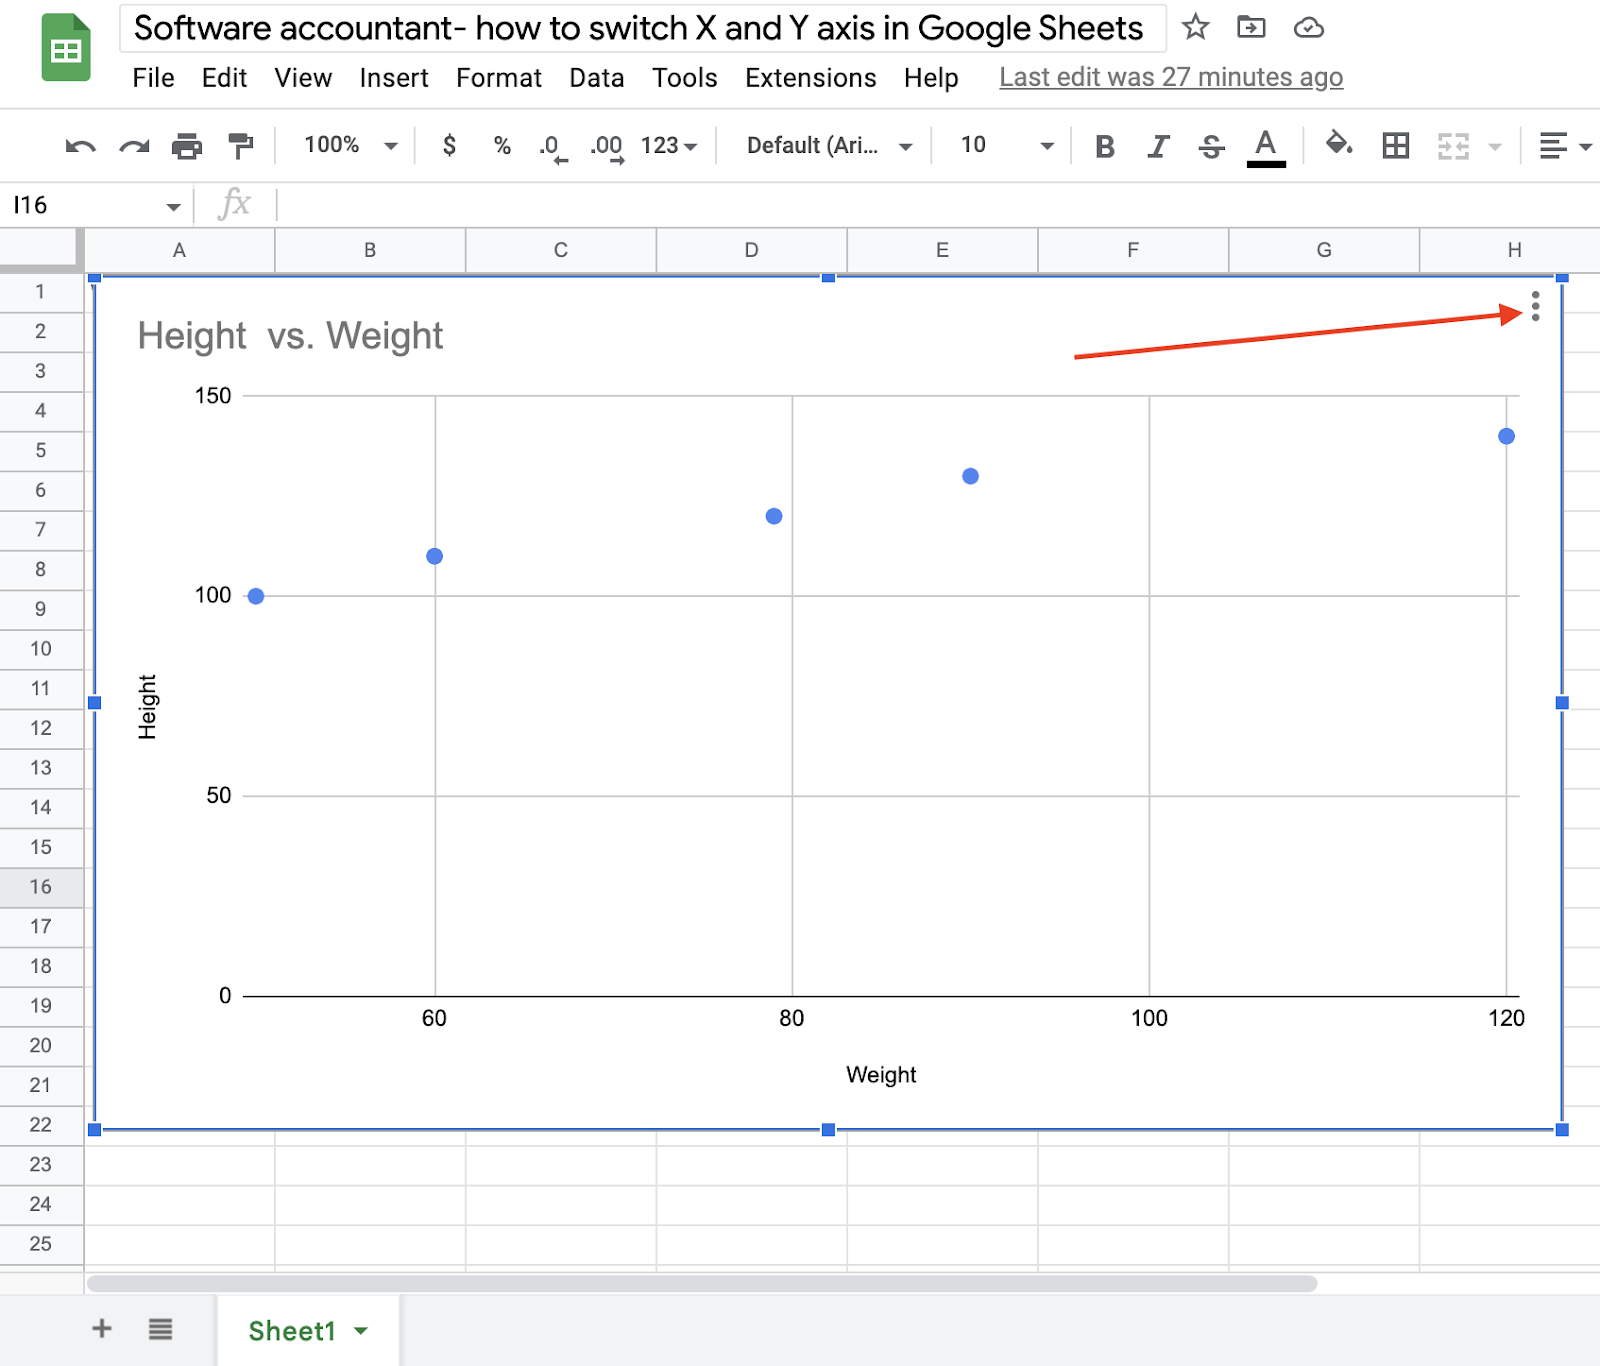 How To Switch X and Y Axis in Google Sheets